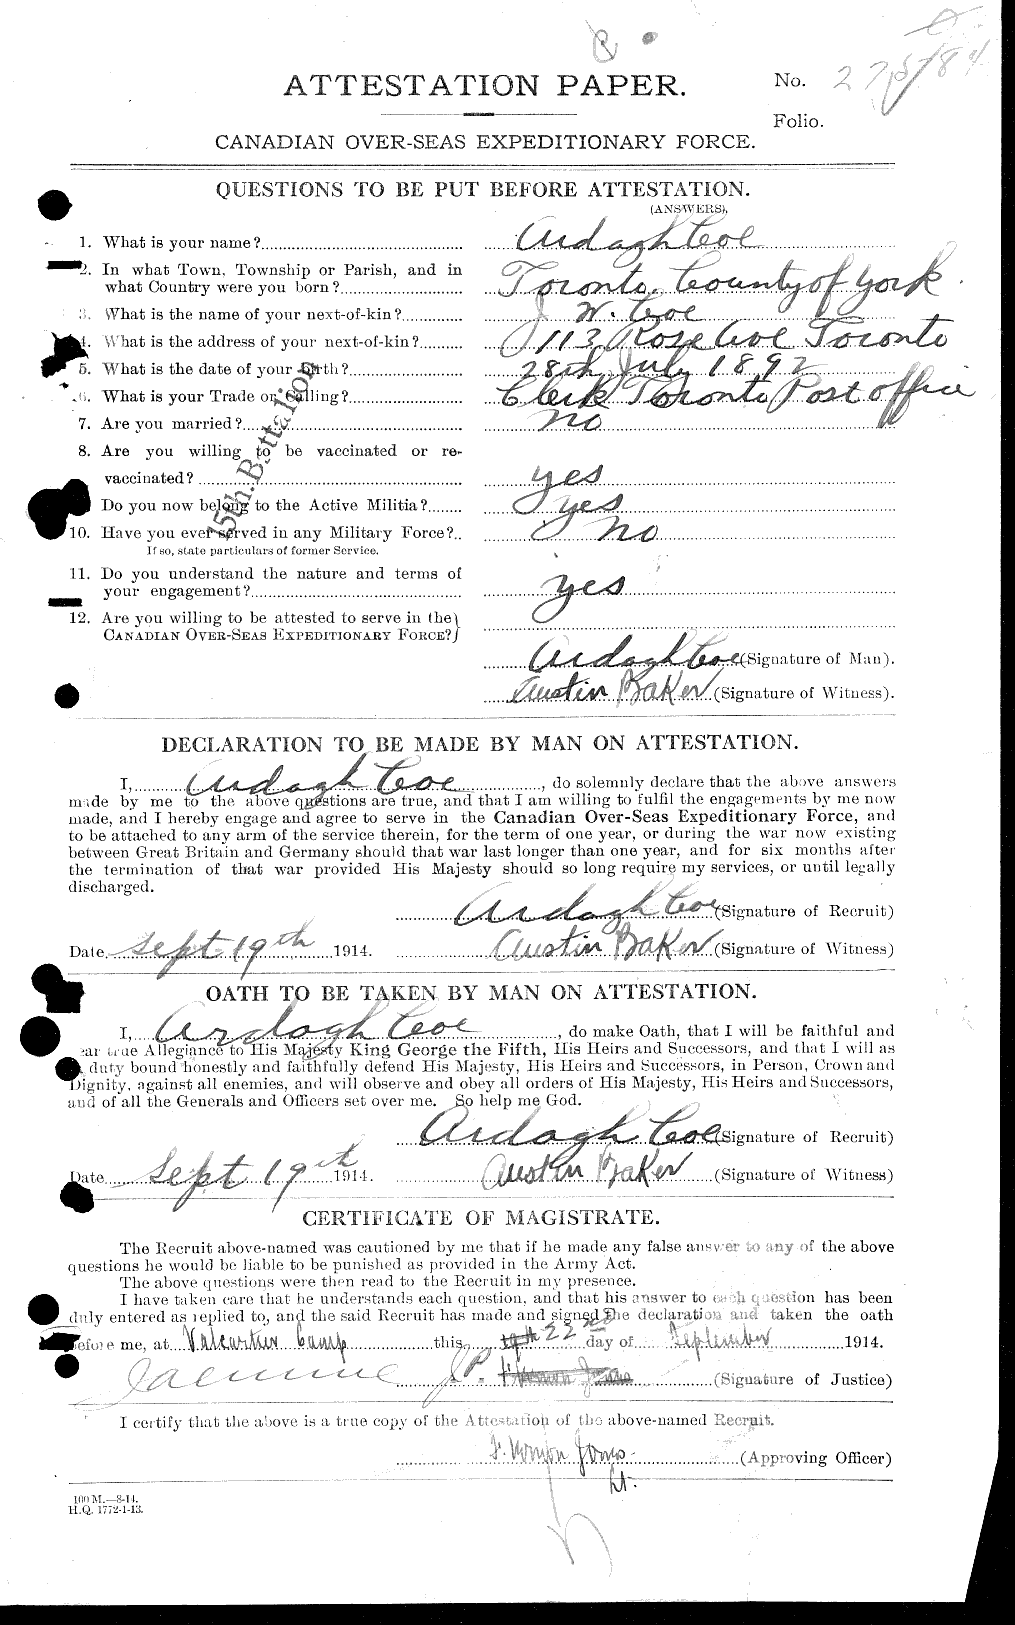 Personnel Records of the First World War - CEF 026937a